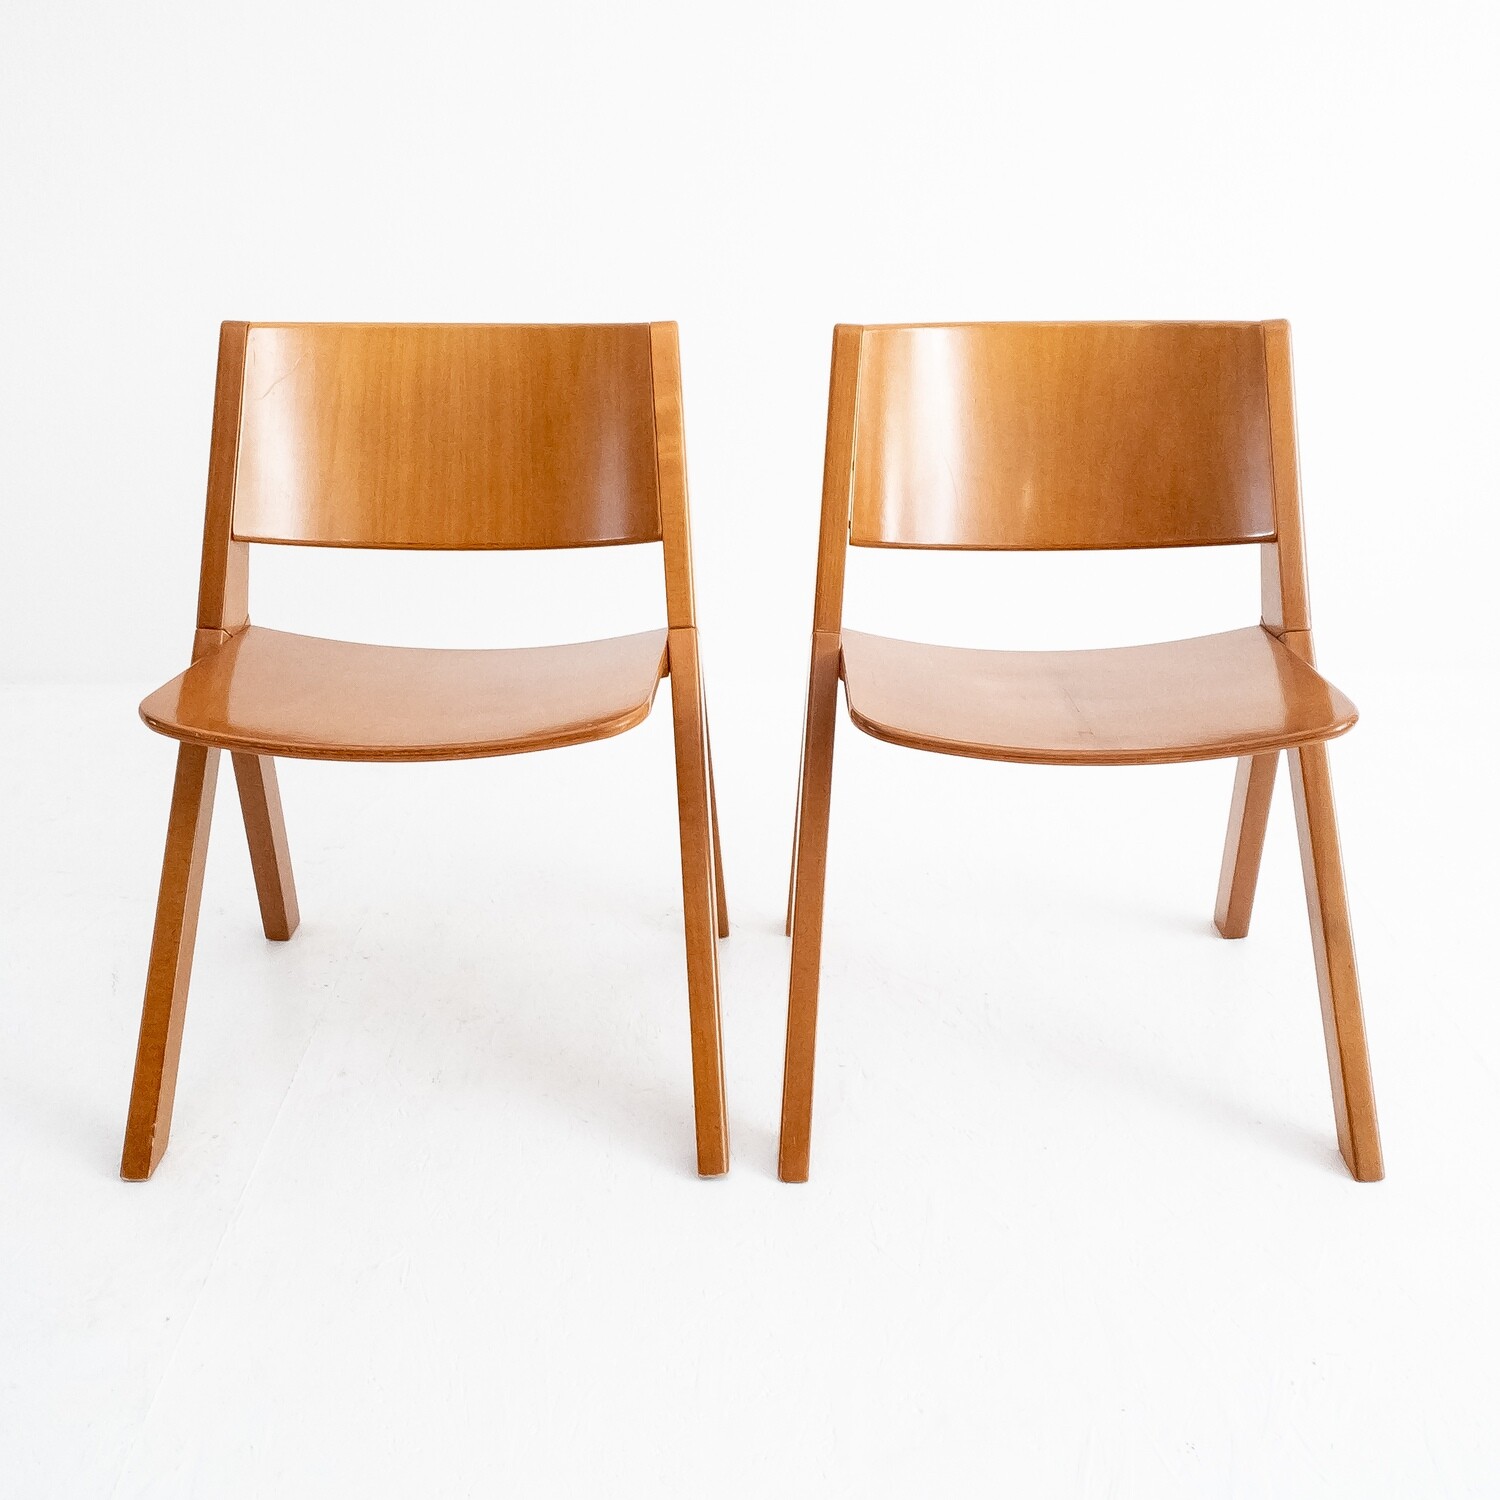 Set of 2 wooden chairs, mod. Platea by Mauro Pasquinelli for Misura Emme, 1979